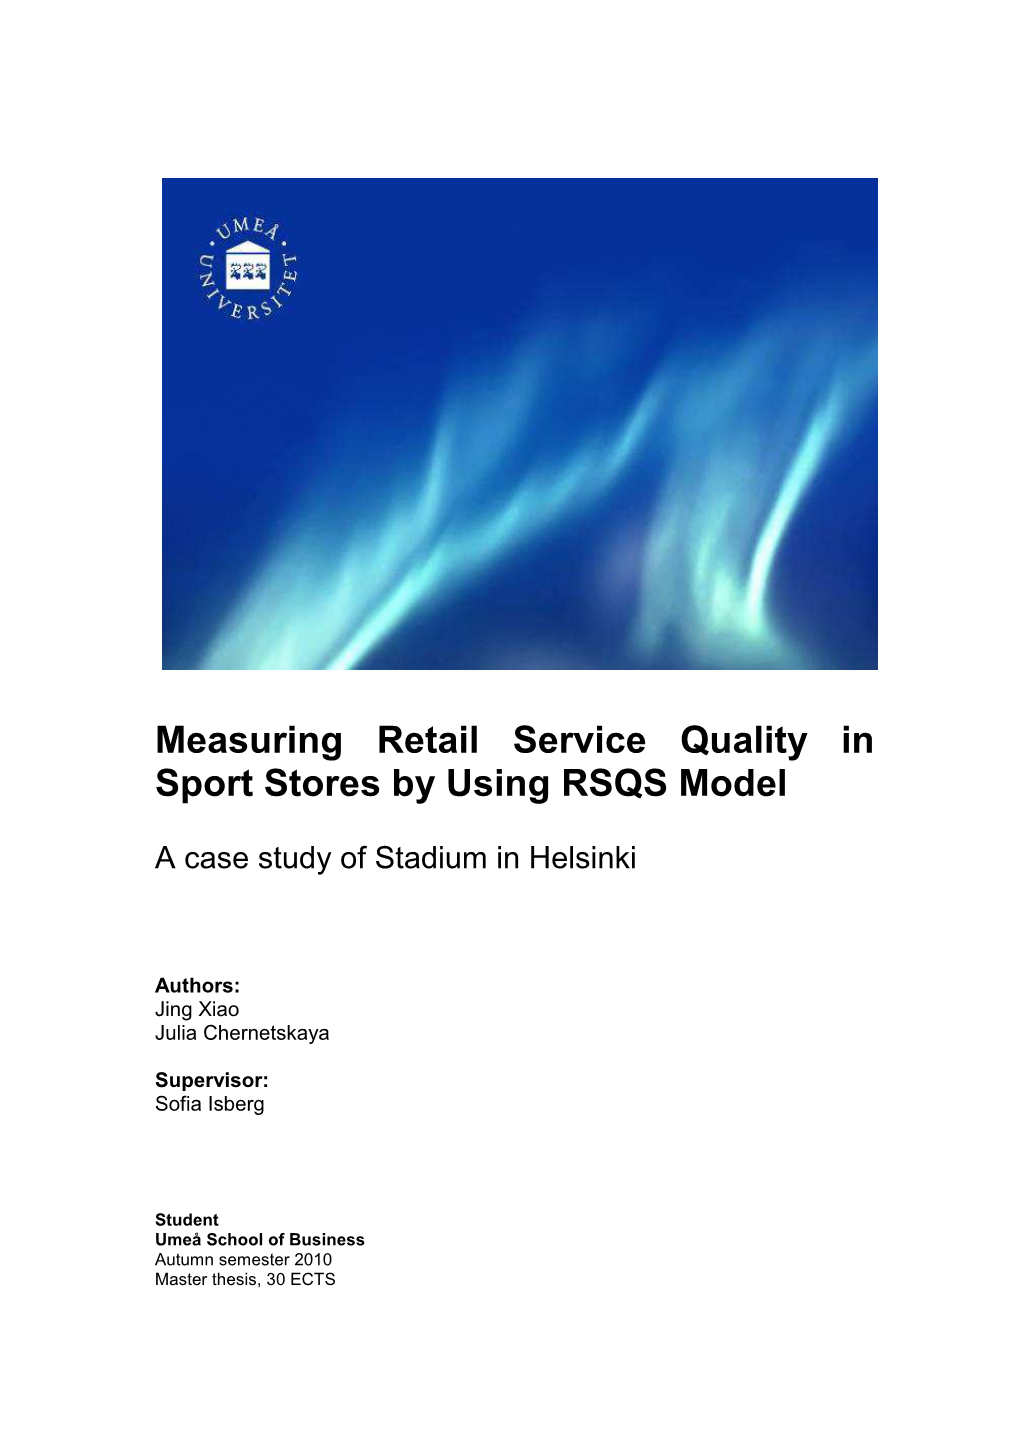 Measuring Retail Service Quality in Sport Stores by Using RSQS Model